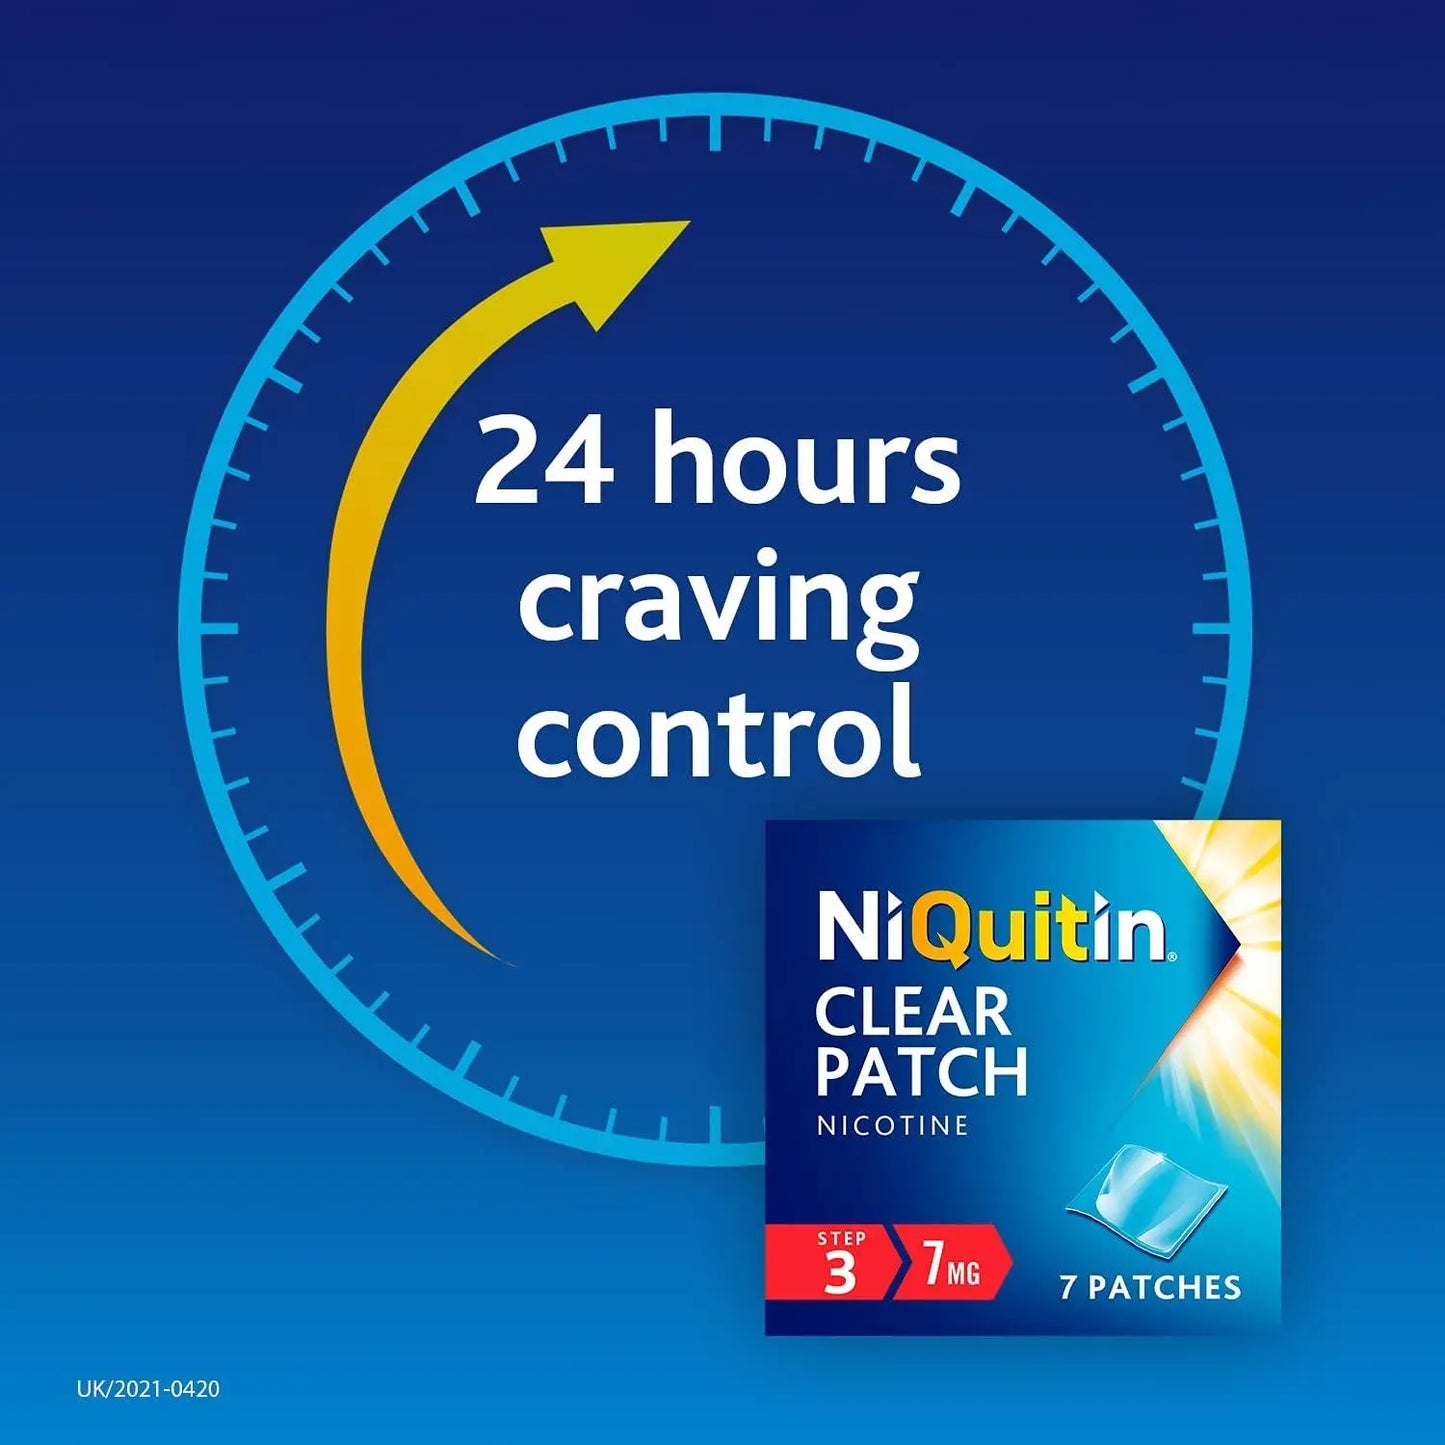 Nicotinell 7mg/24 Hour Patch Step 3 7 Day Supply